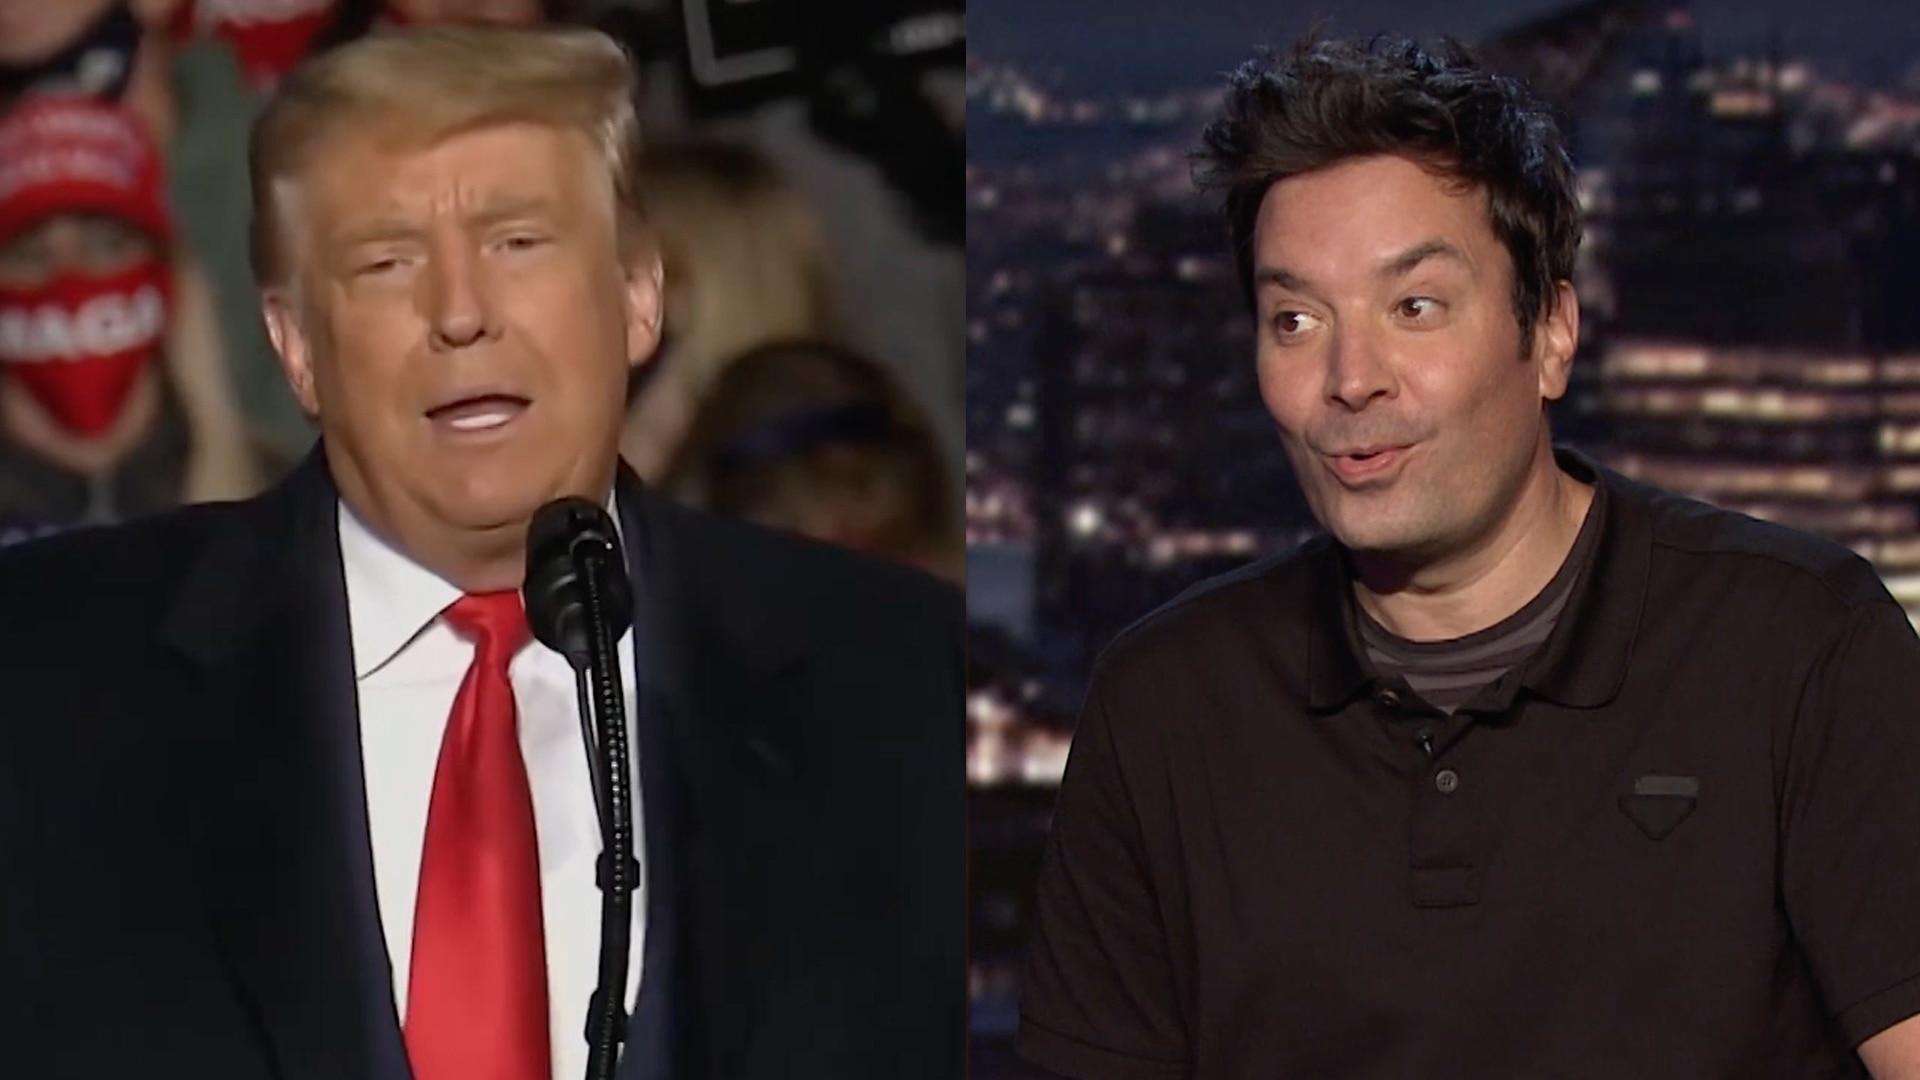 Watch The Tonight Show Starring Jimmy Fallon Highlight: Trump Ditches